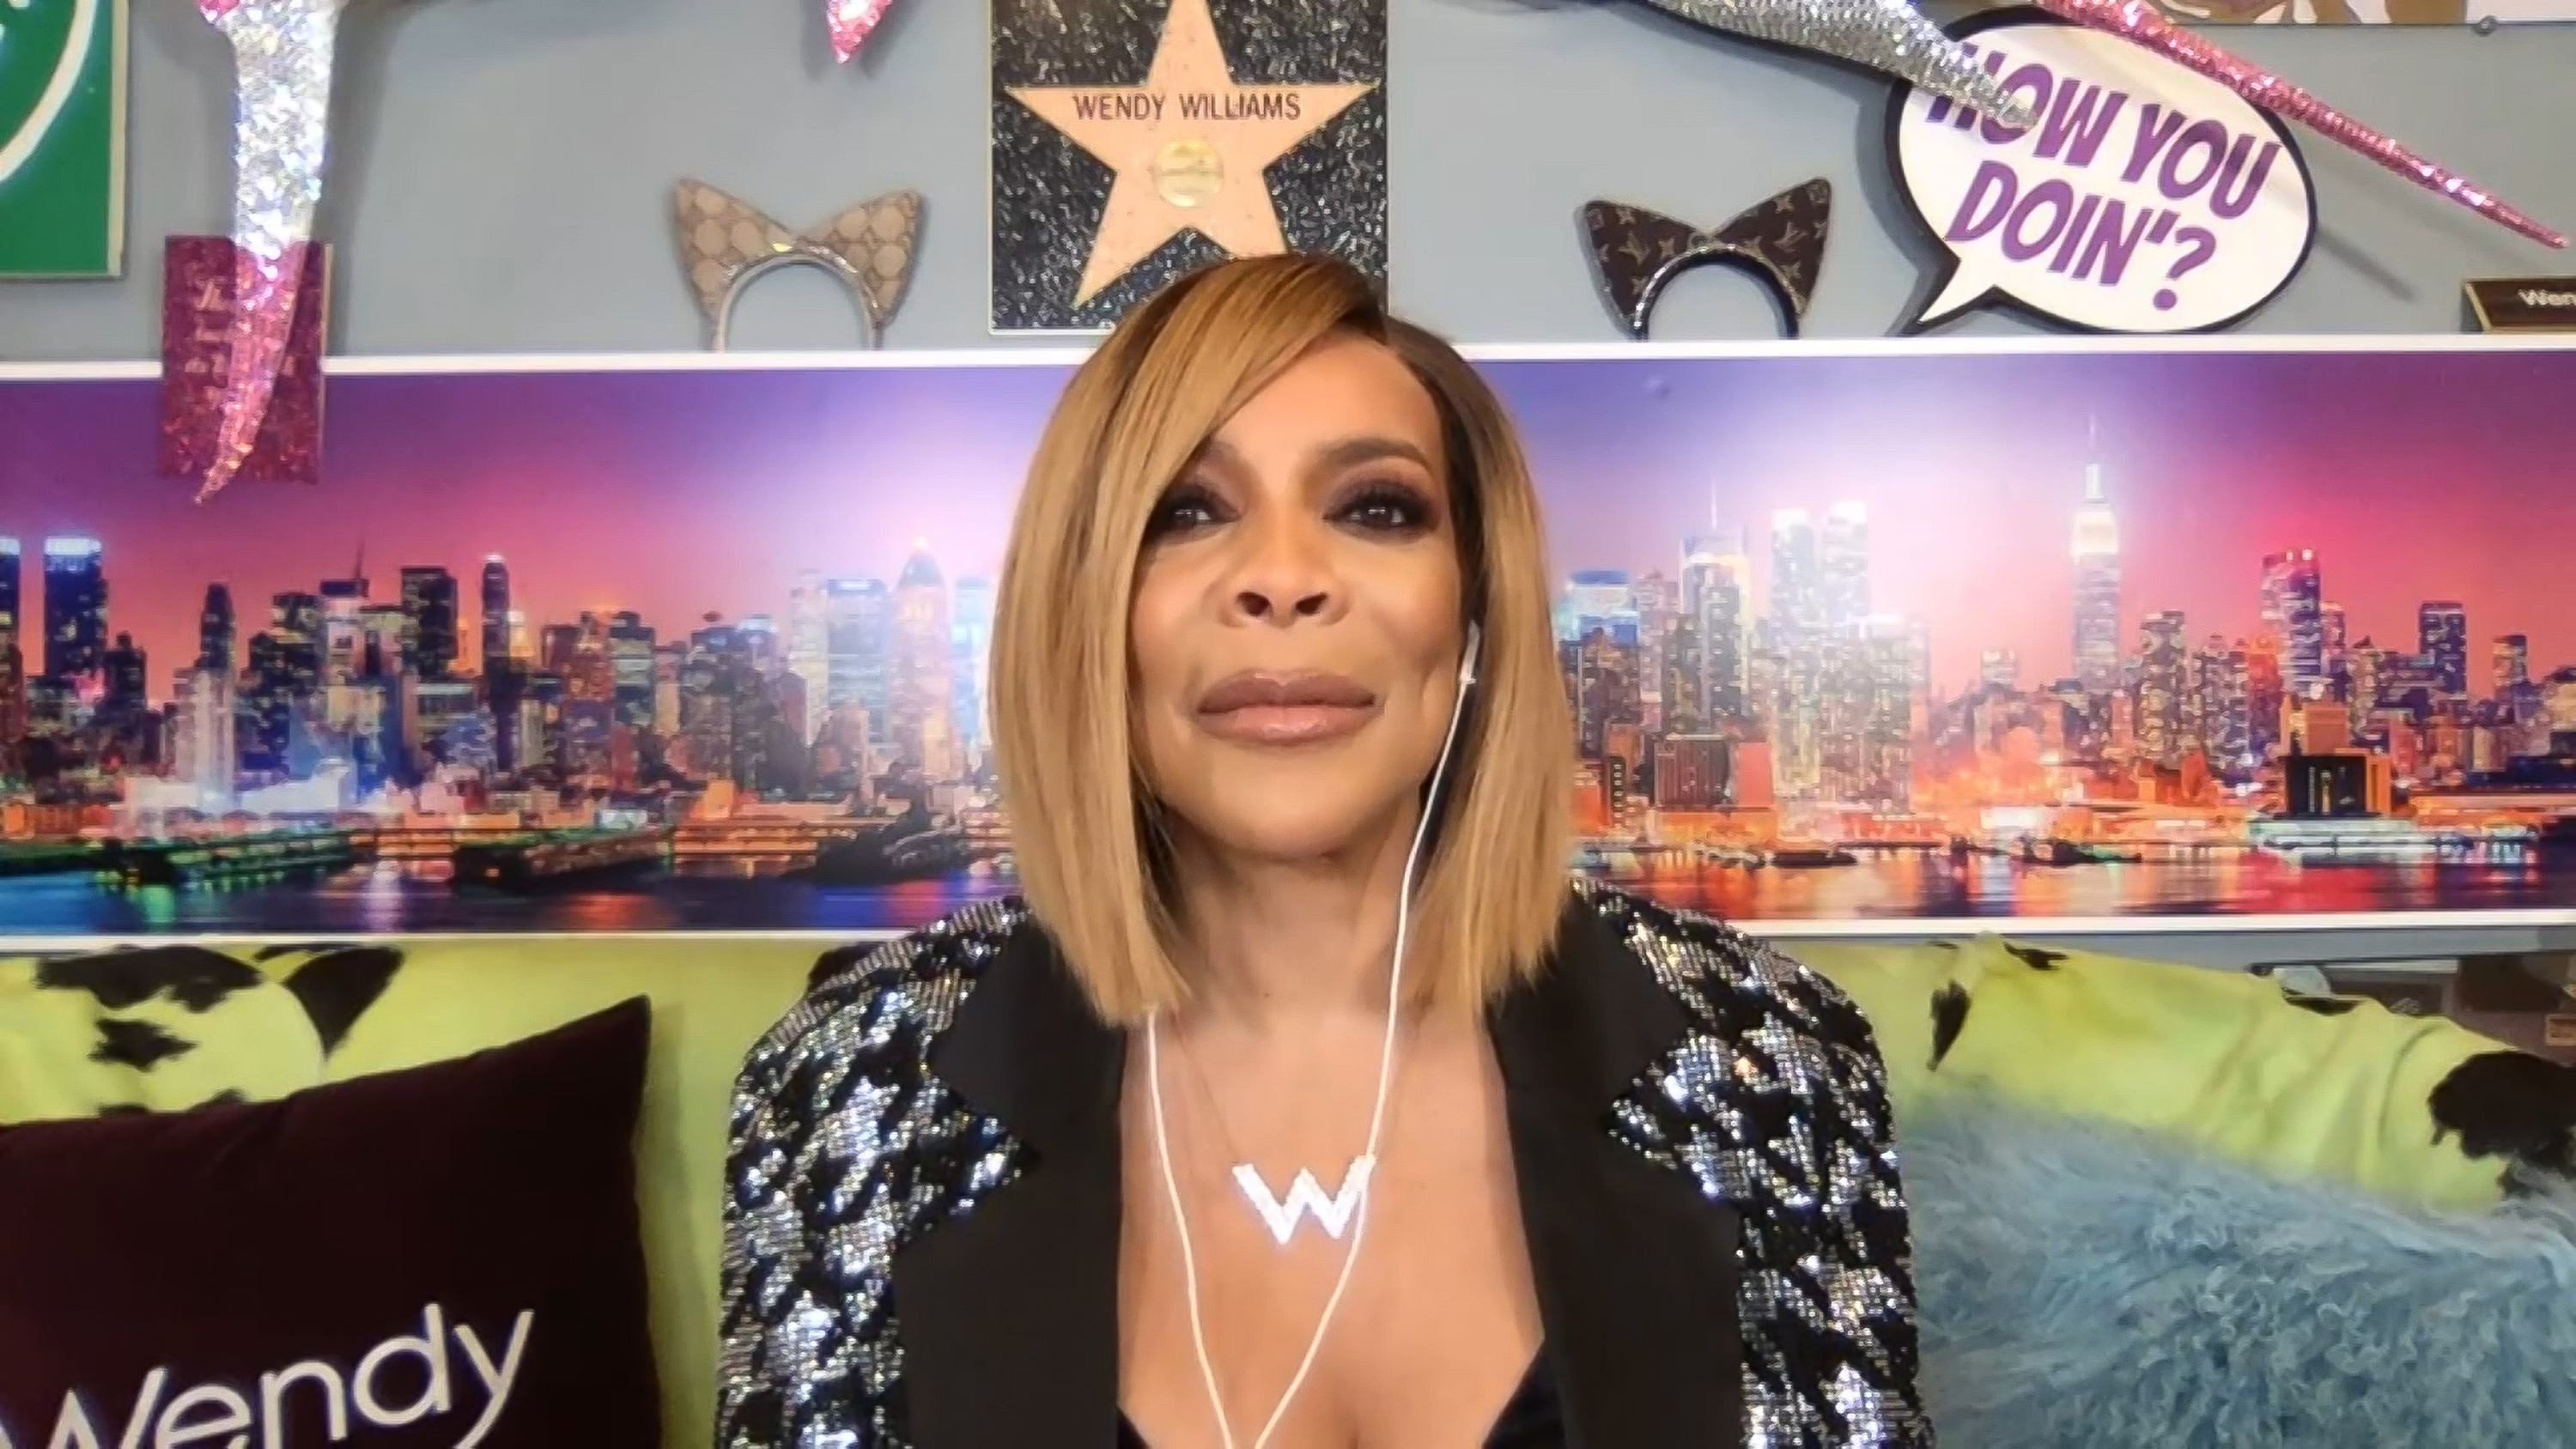 Wendy Williams during a virtual interview on "Watch What Happens Live With Andy Cohen" on January 28, 2021. | Source: Youtube